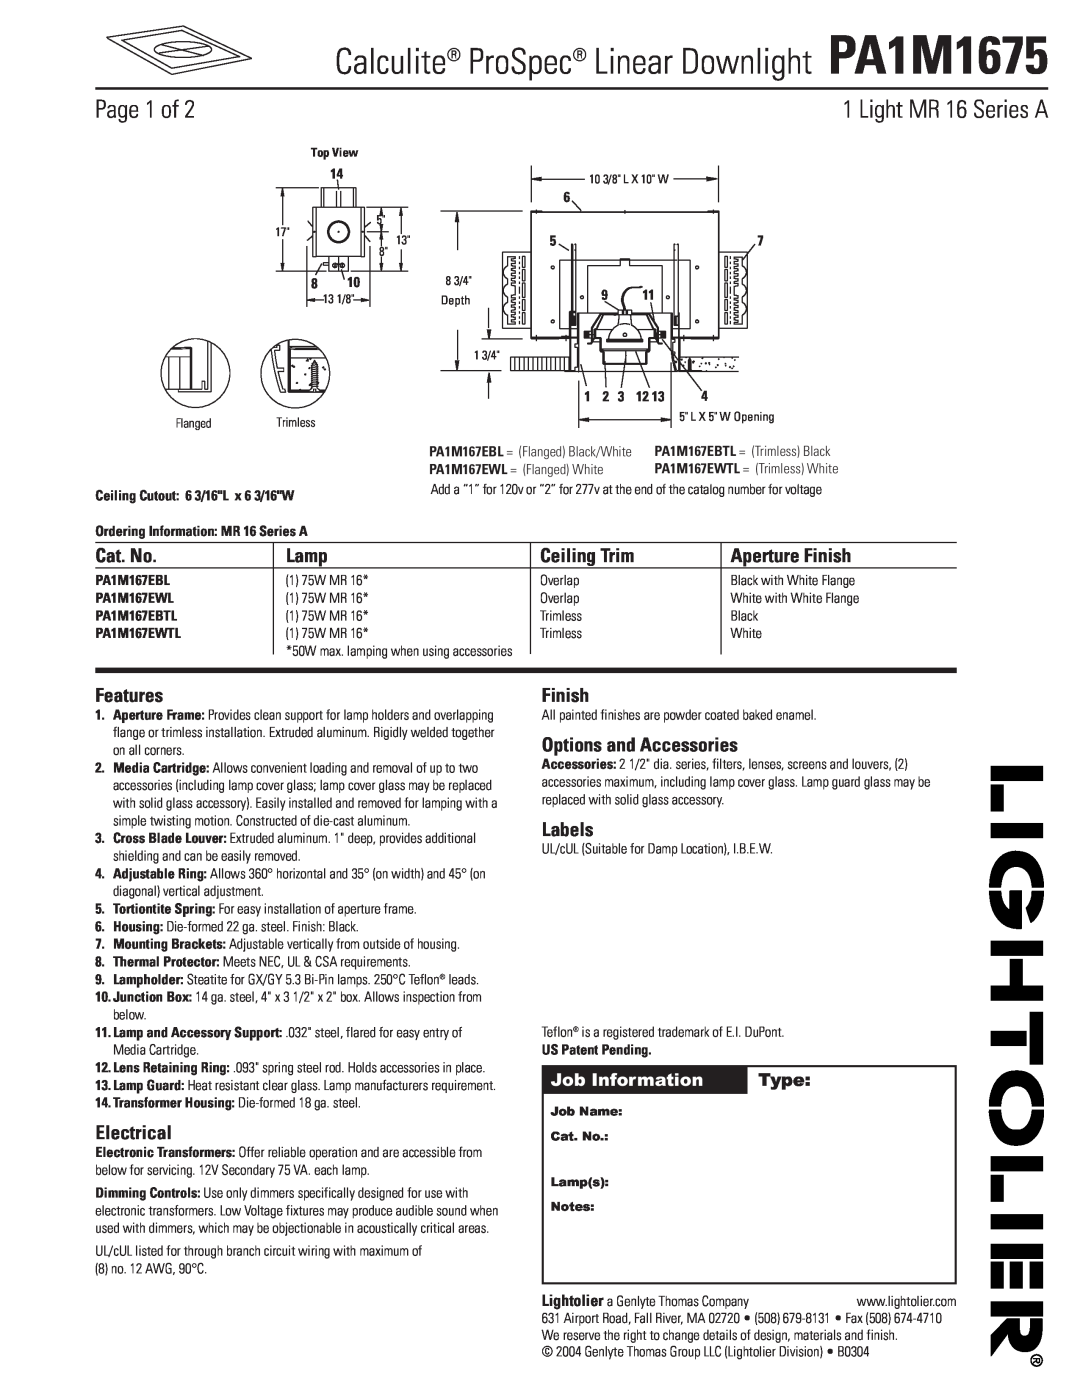 Lightolier PA1M1675 manual Page 1 of, Light MR 16 Series A, Cat. No, Lamp, Ceiling Trim, Aperture Finish, Features, Labels 